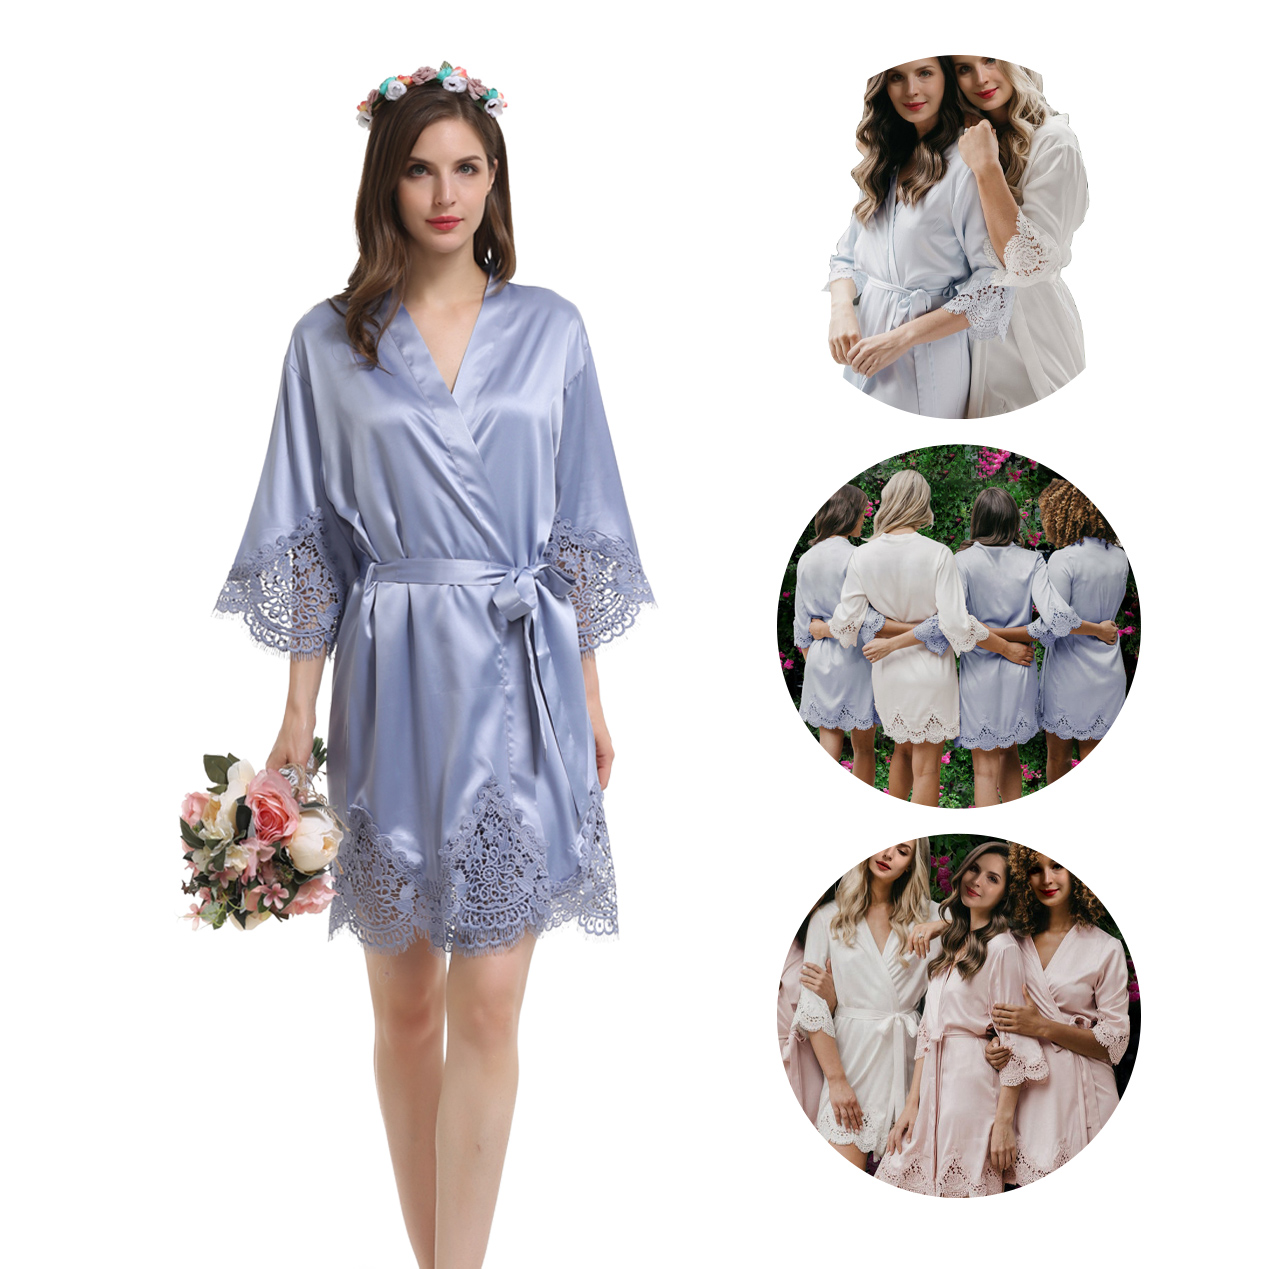 Style No: A900P Women / Girl Plain Matte Silky Satin Bridesmaid/Bridal/Wedding Robes with P Lace